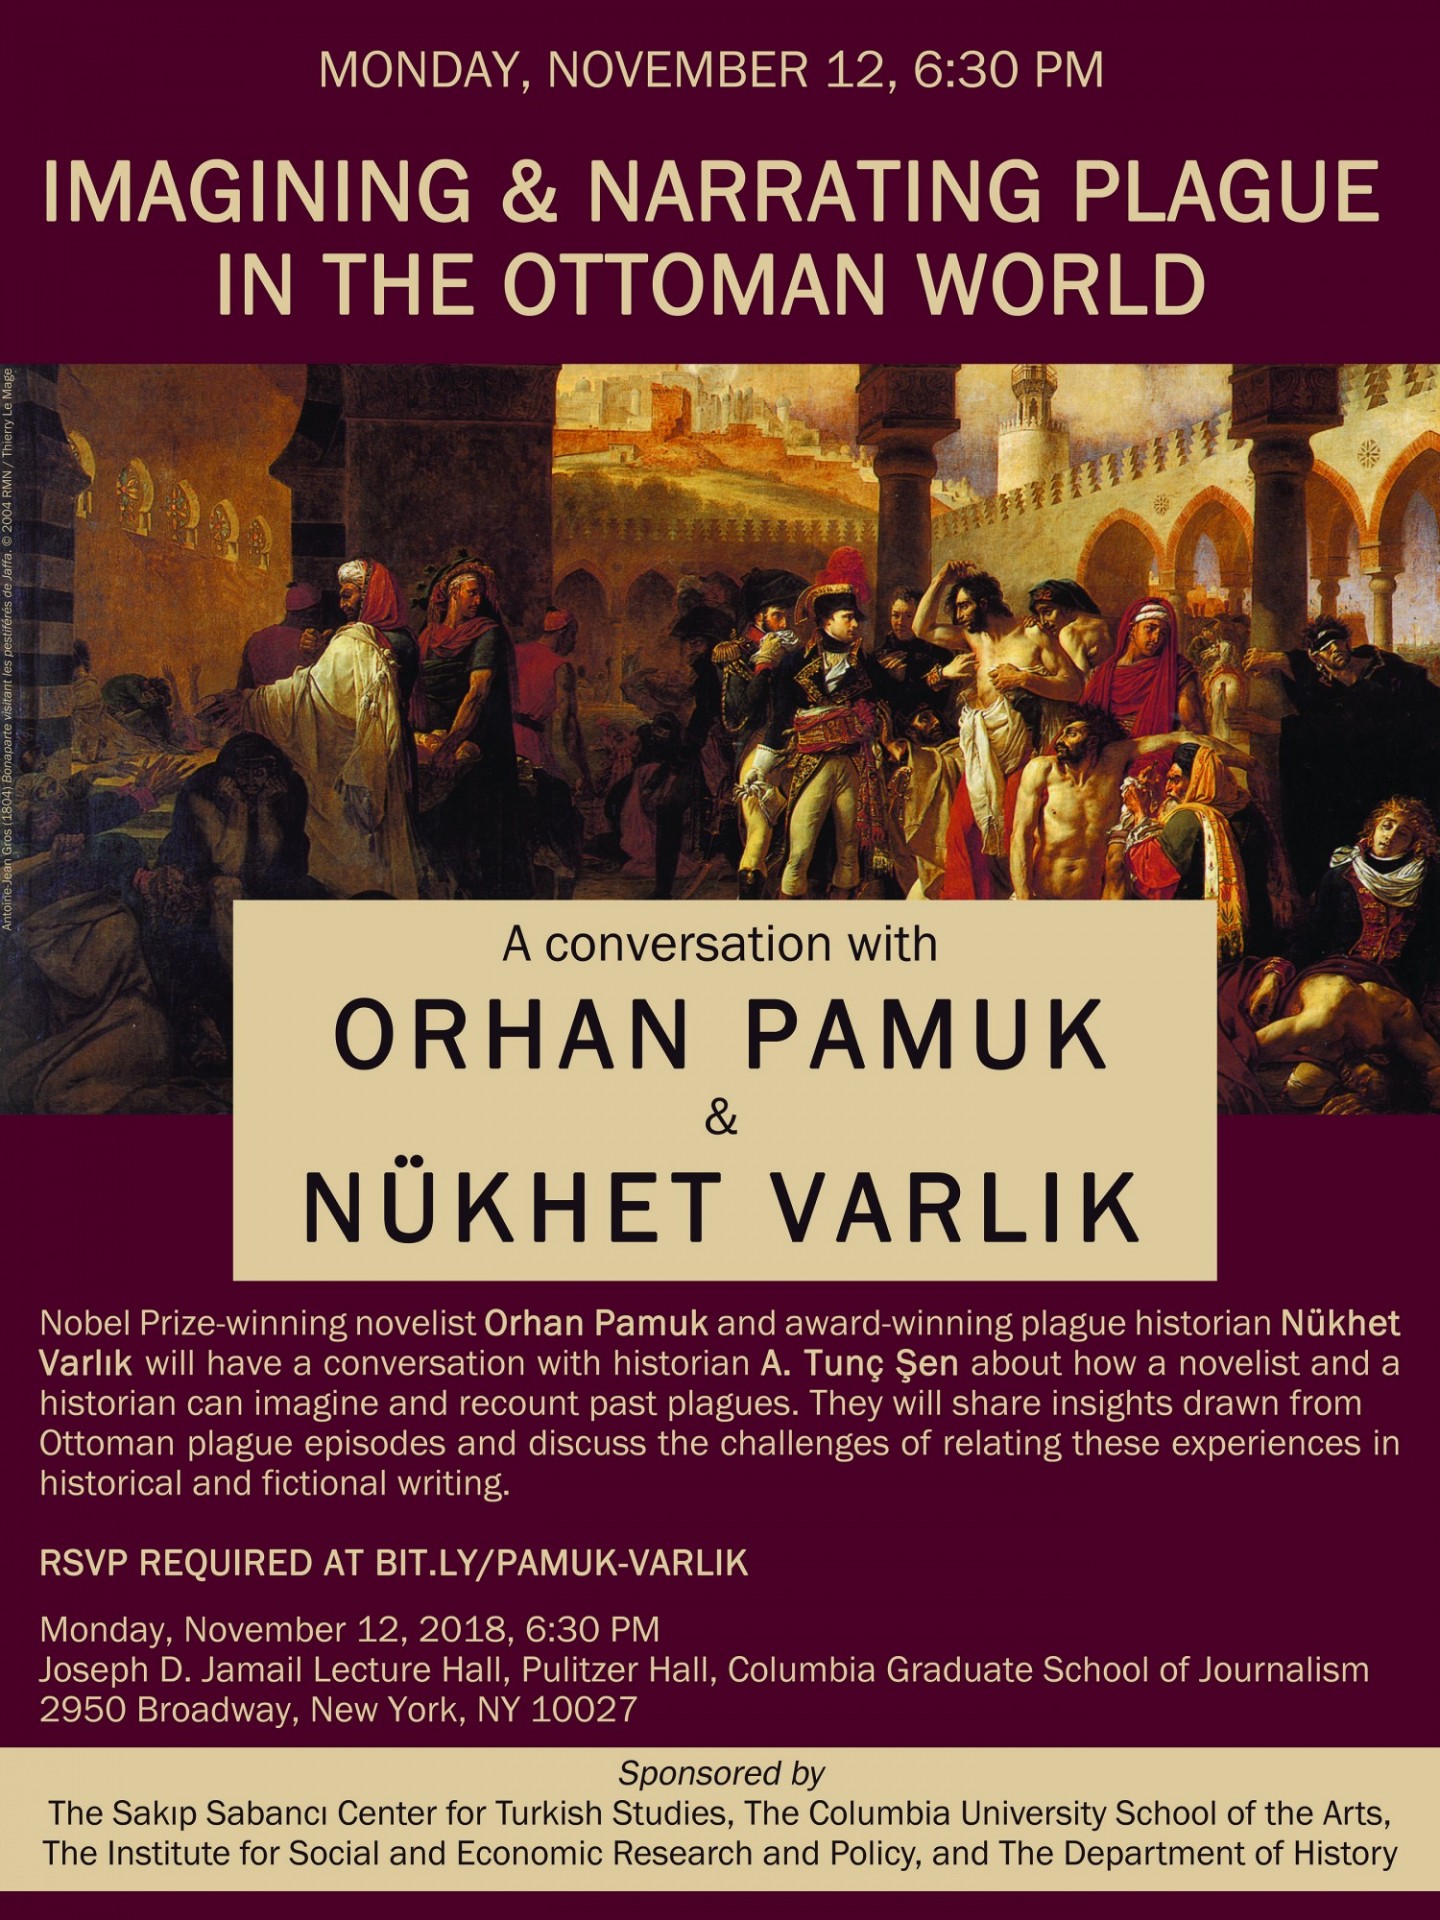 Event flyer for "Imagining & Narrating Plague in the Ottoman World"